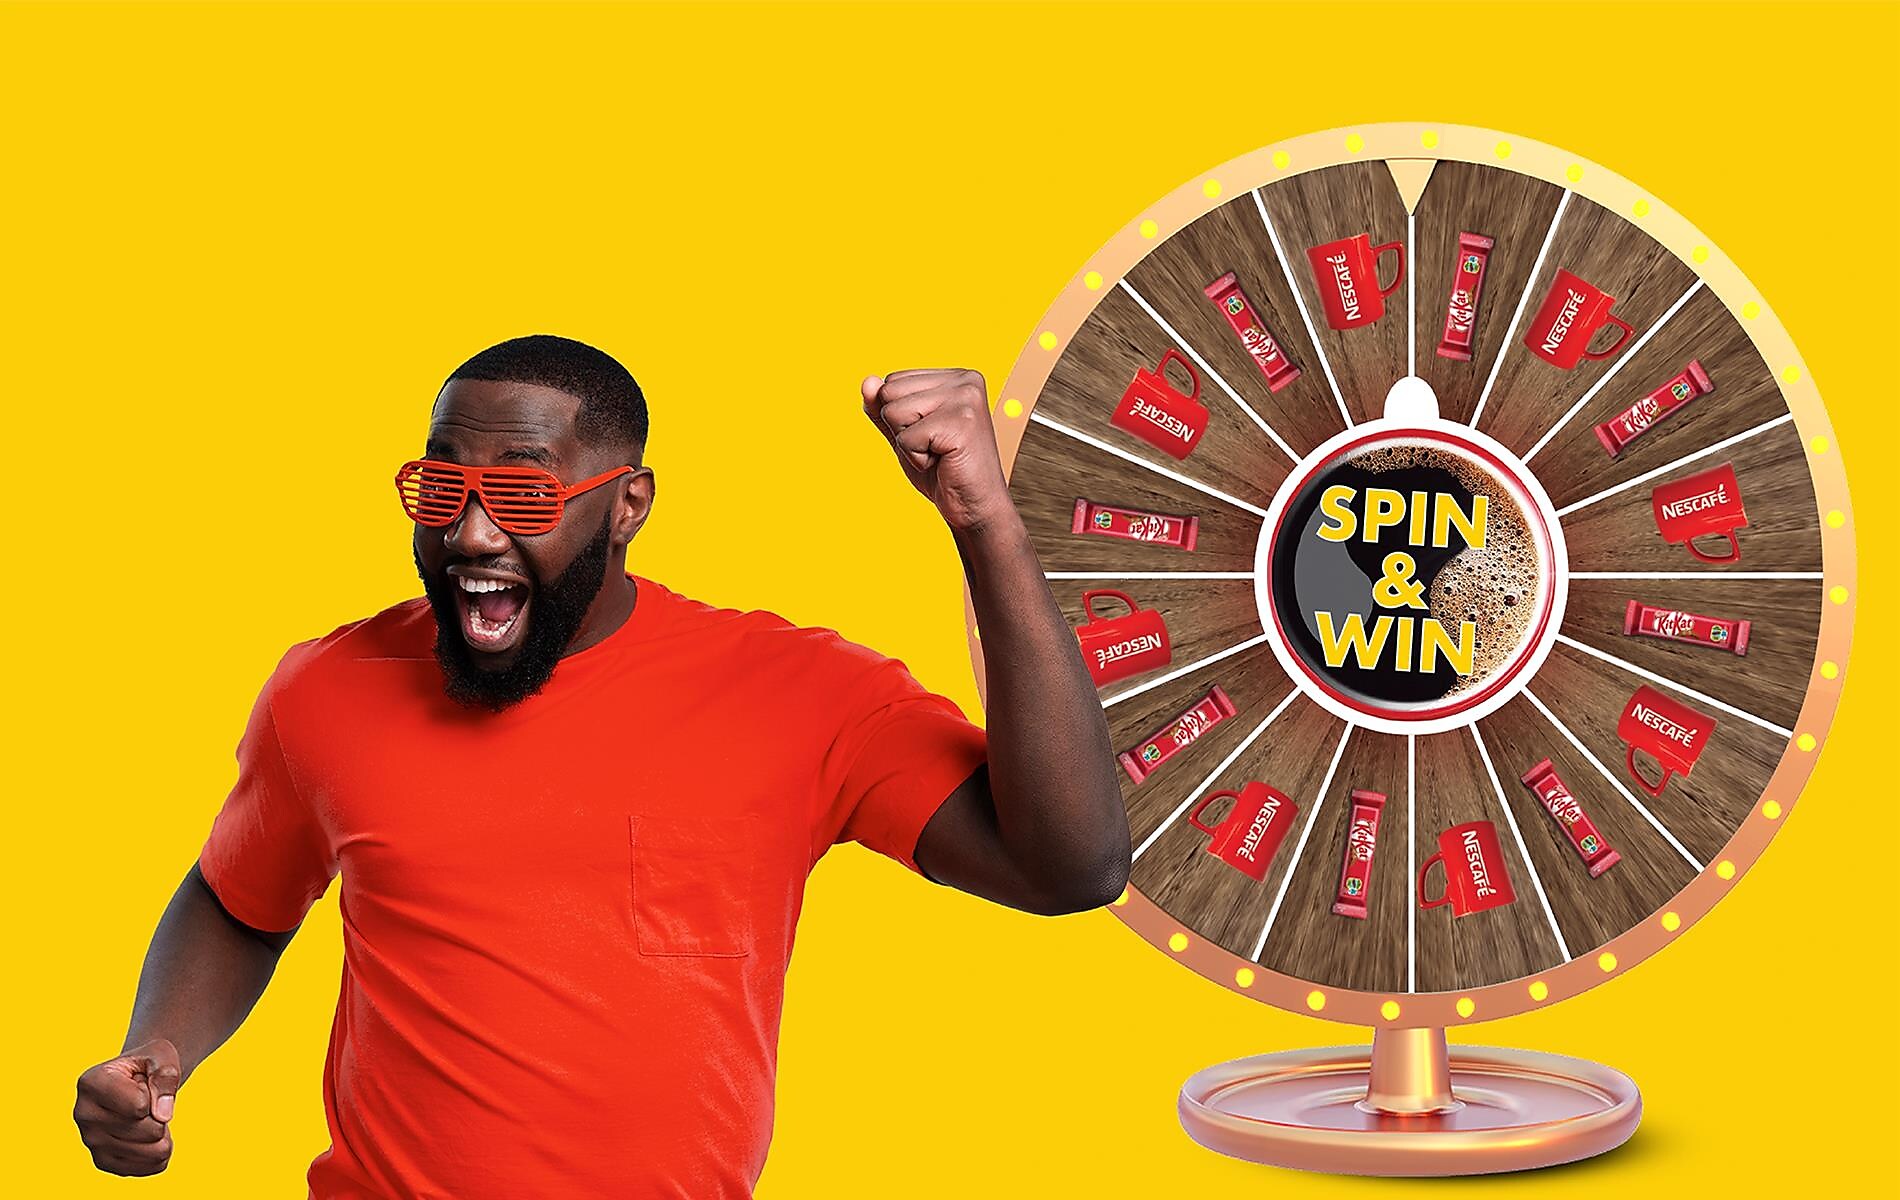 FUEL UP TO SPIN IT AND WIN IT!